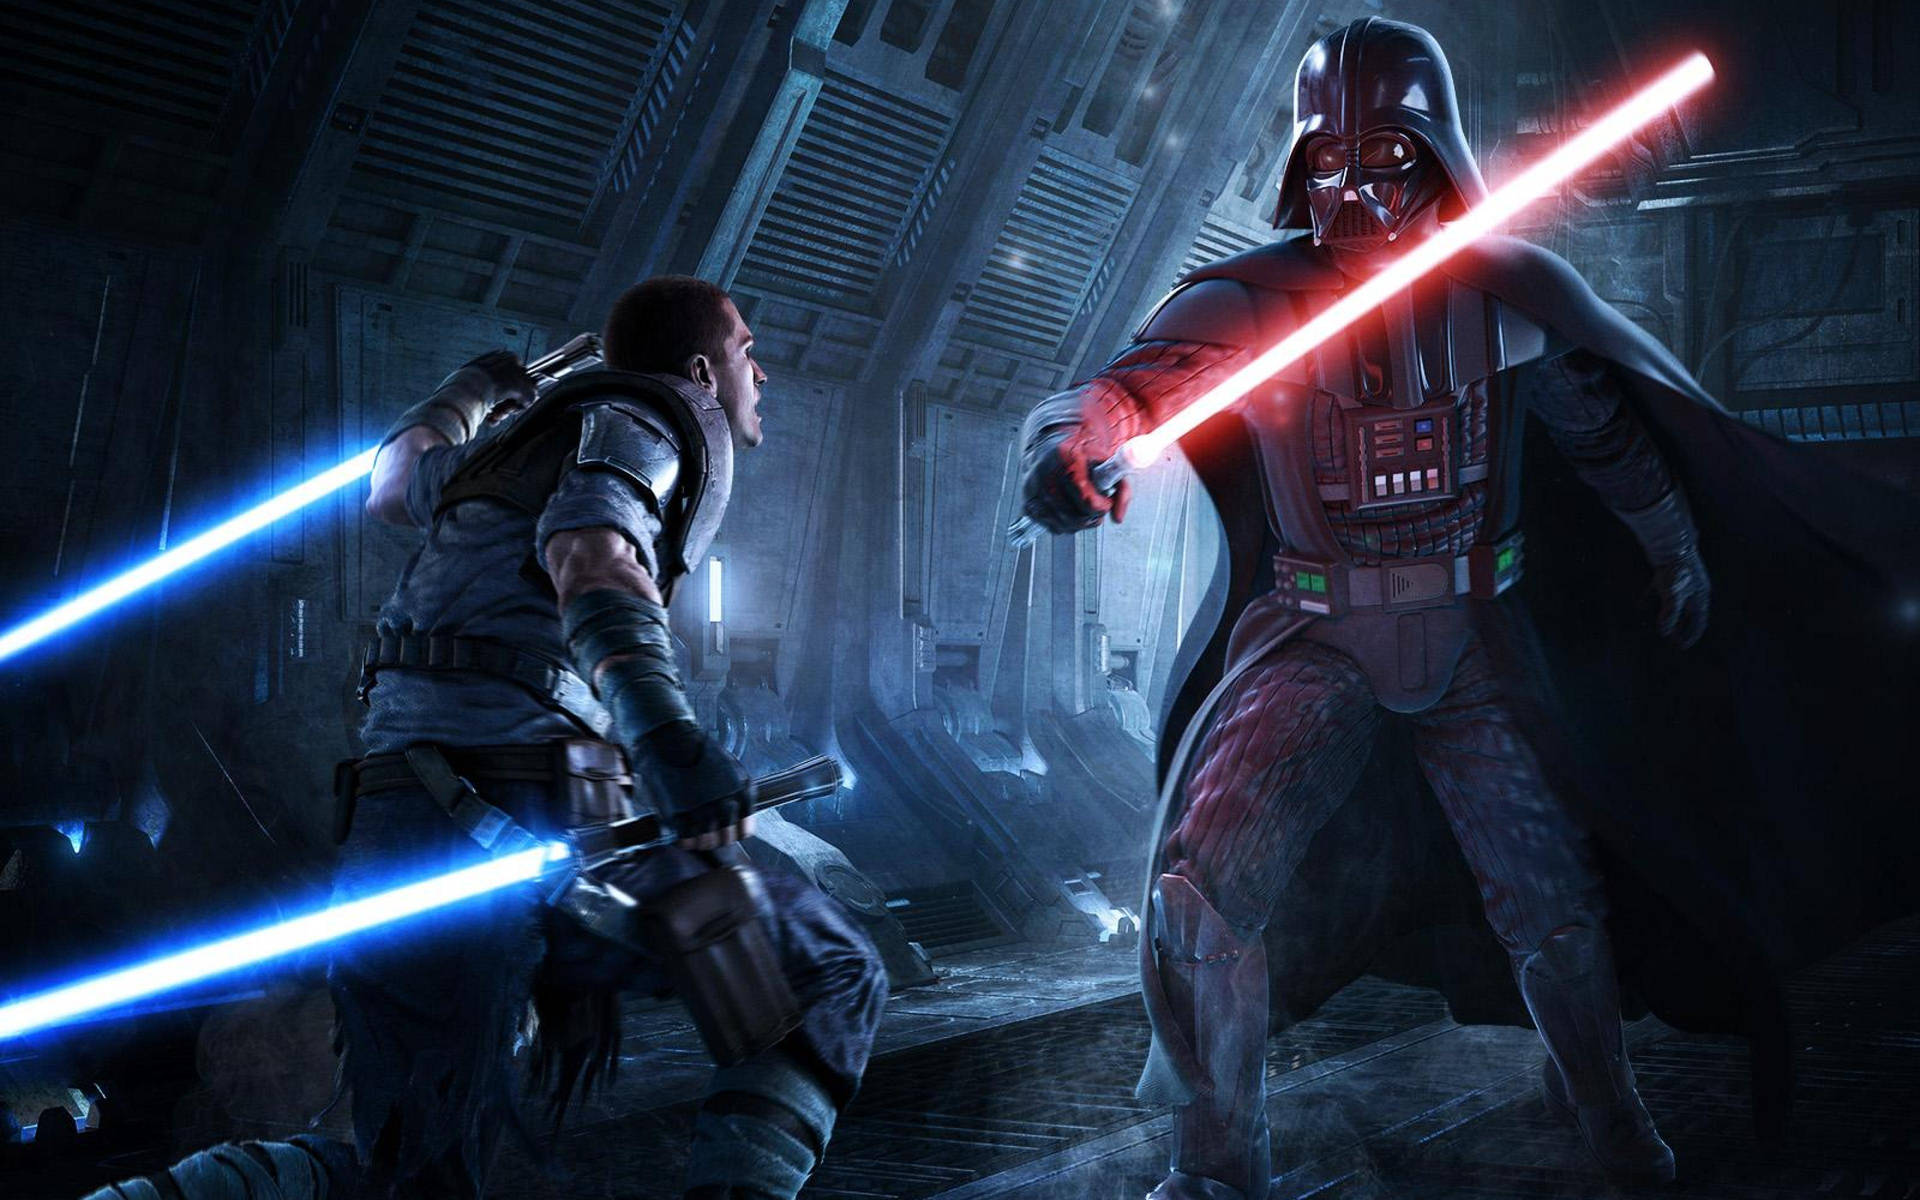 An epic showdown between Darth Vader and a Jedi. Wallpaper